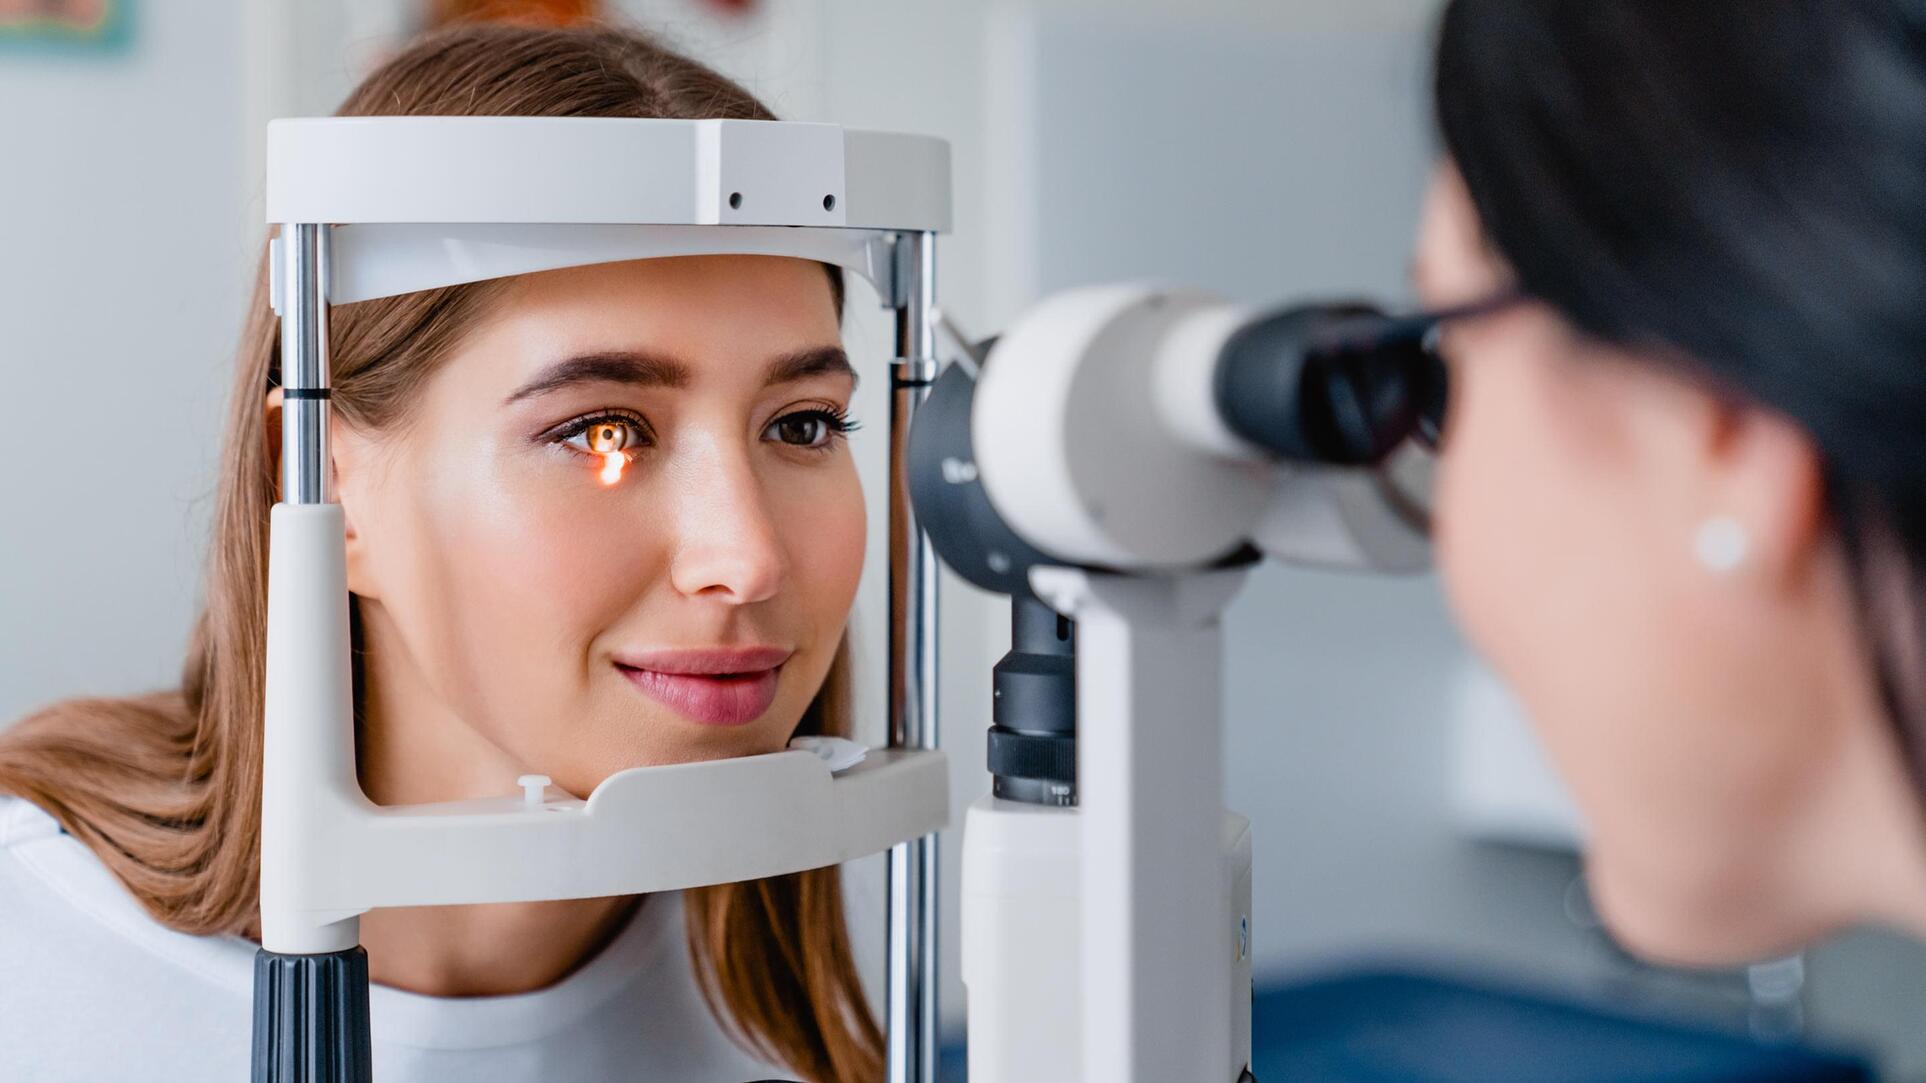 Optometrists are healthcare professionals who specialize in diagnosing and treating vision problems.